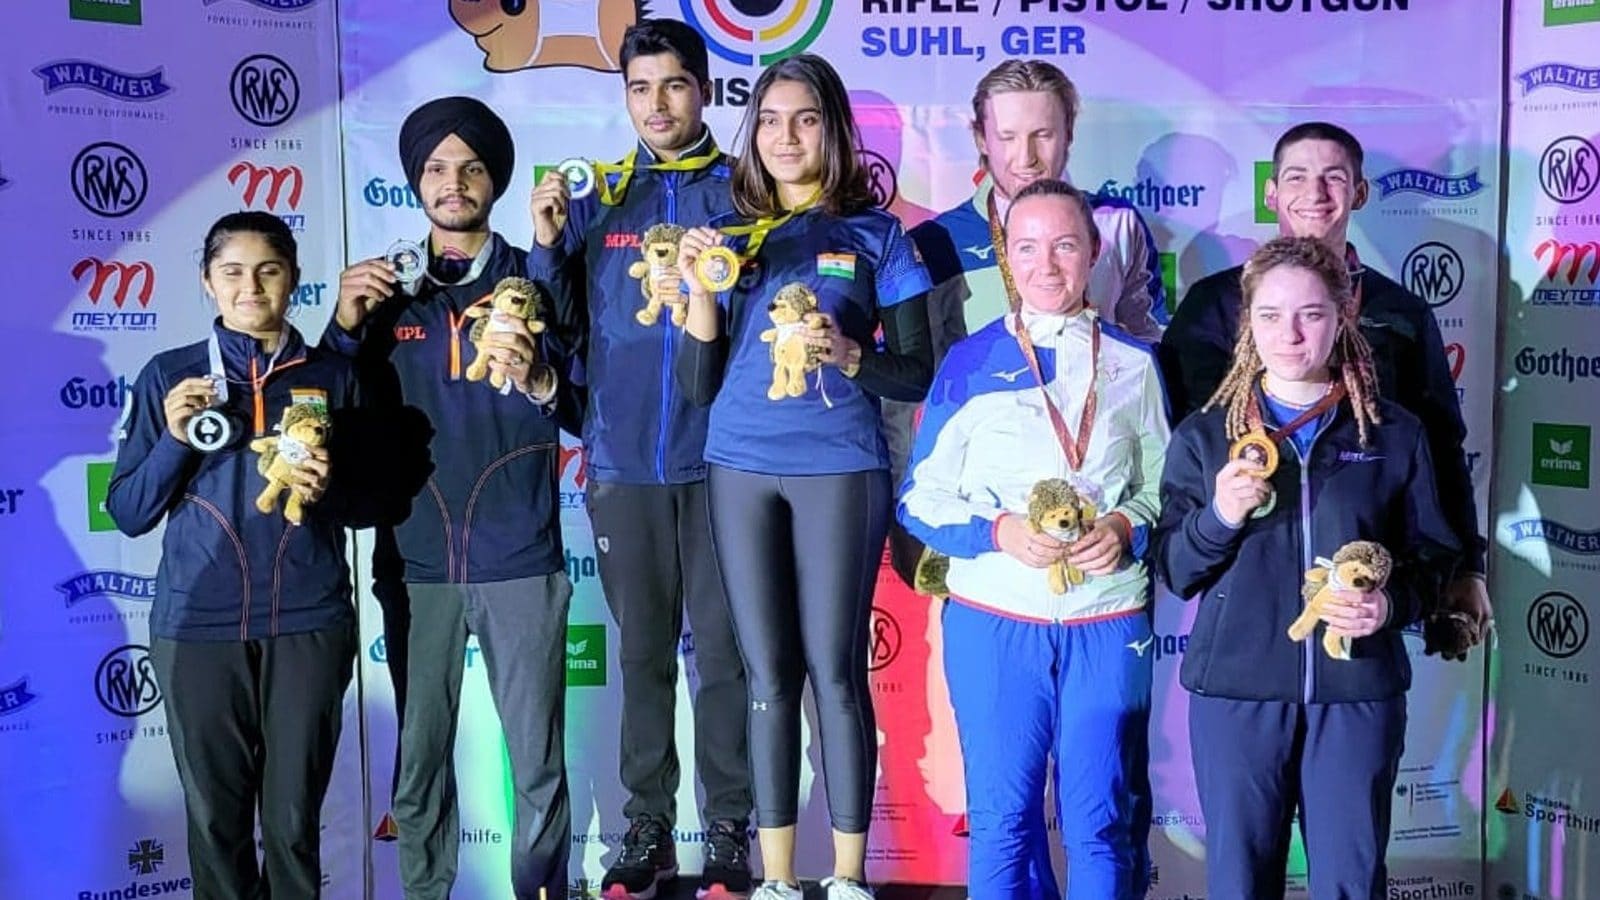 ISSF Junior World Cup: Esha Singh and Saurabh Chaudhary won gold in Mixed Team Pistol even_30.1